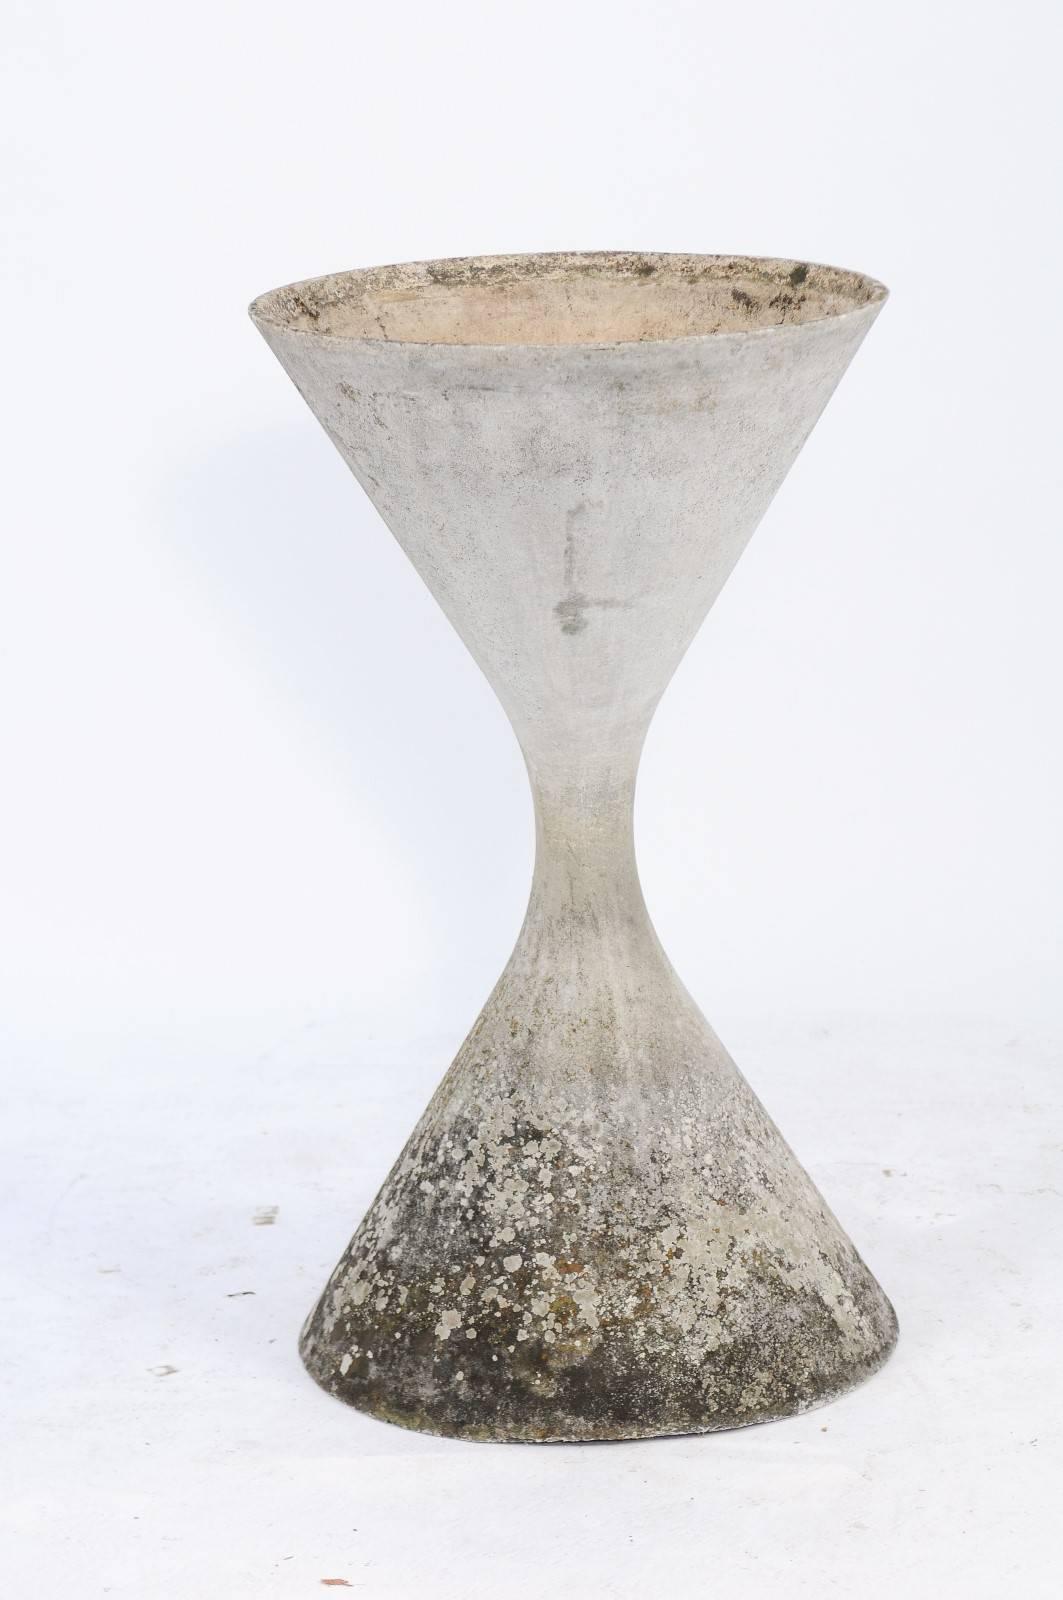 Swiss Willy Guhl Fiber Cement Diabolo Planter from Switzerland from the 1950s